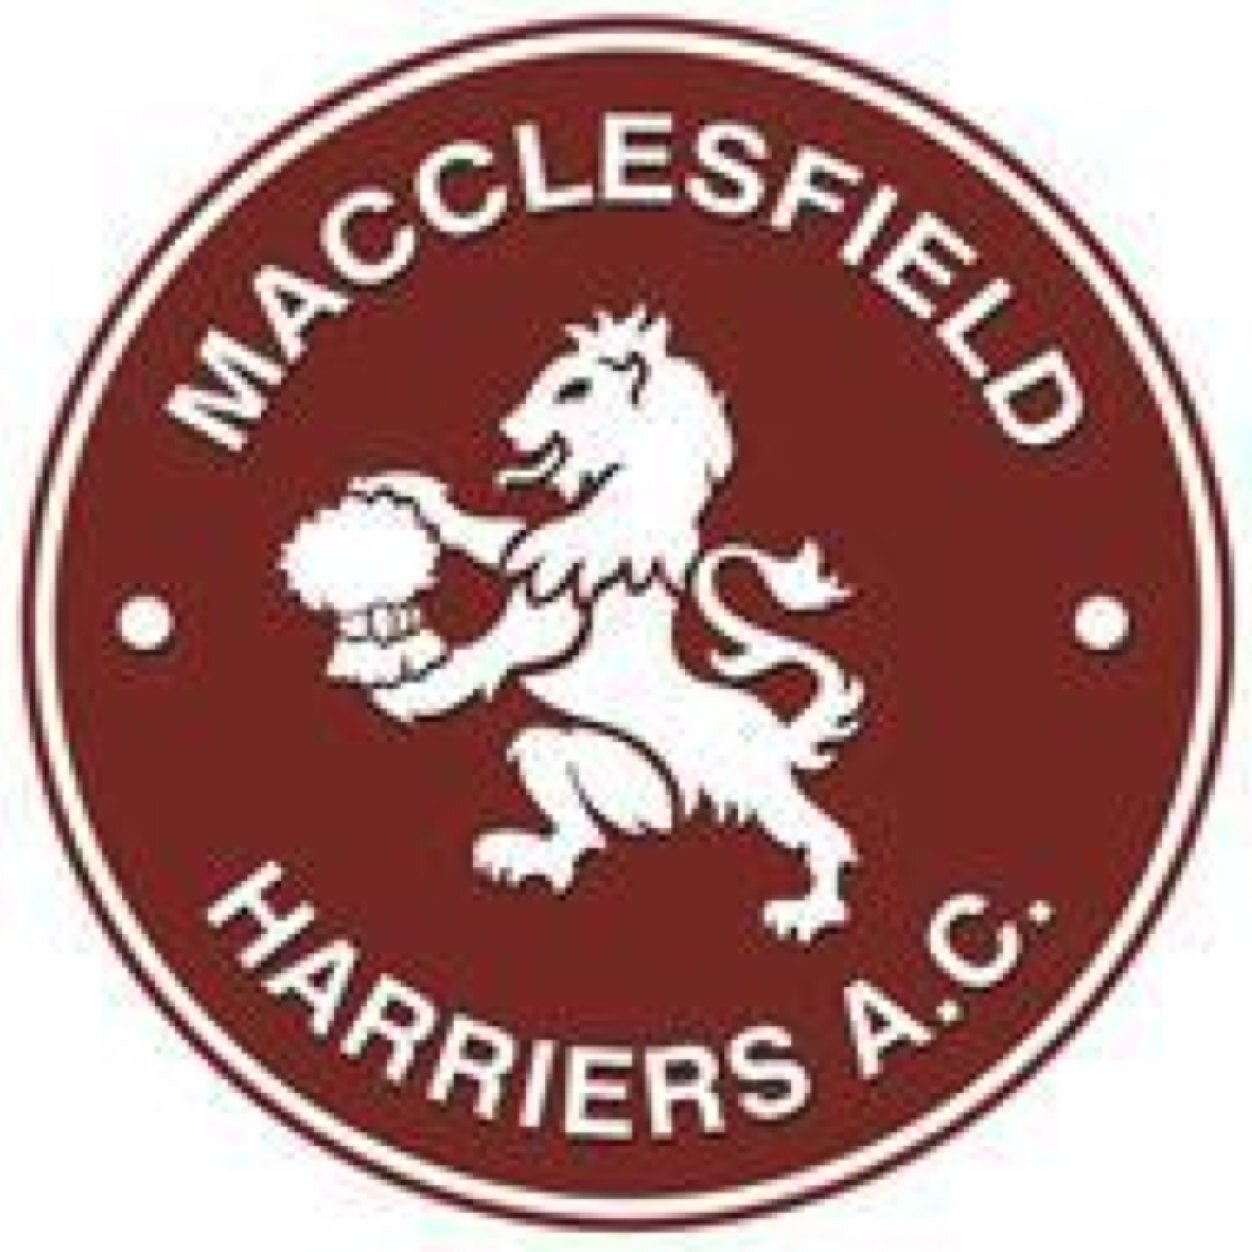 Macclesfield Harriers and Athletic Club
Races organised -  Macclesfield Half Marathon, Langley 7, Forest 5, Tegg's Nose Fell Race.  ALL profits to charities.